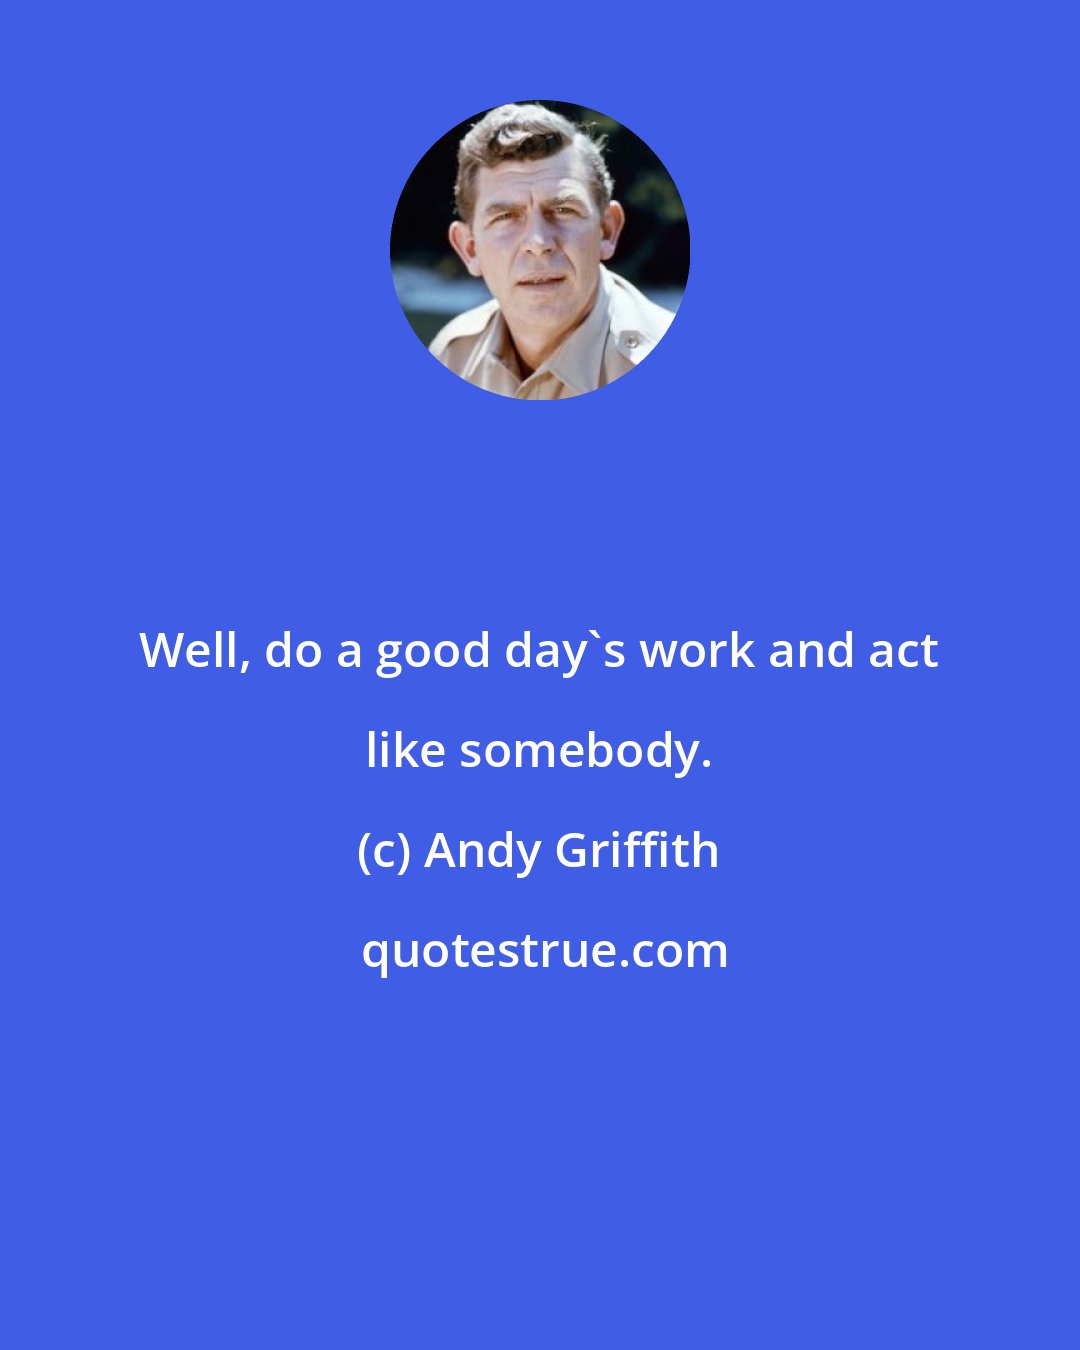 Andy Griffith: Well, do a good day's work and act like somebody.